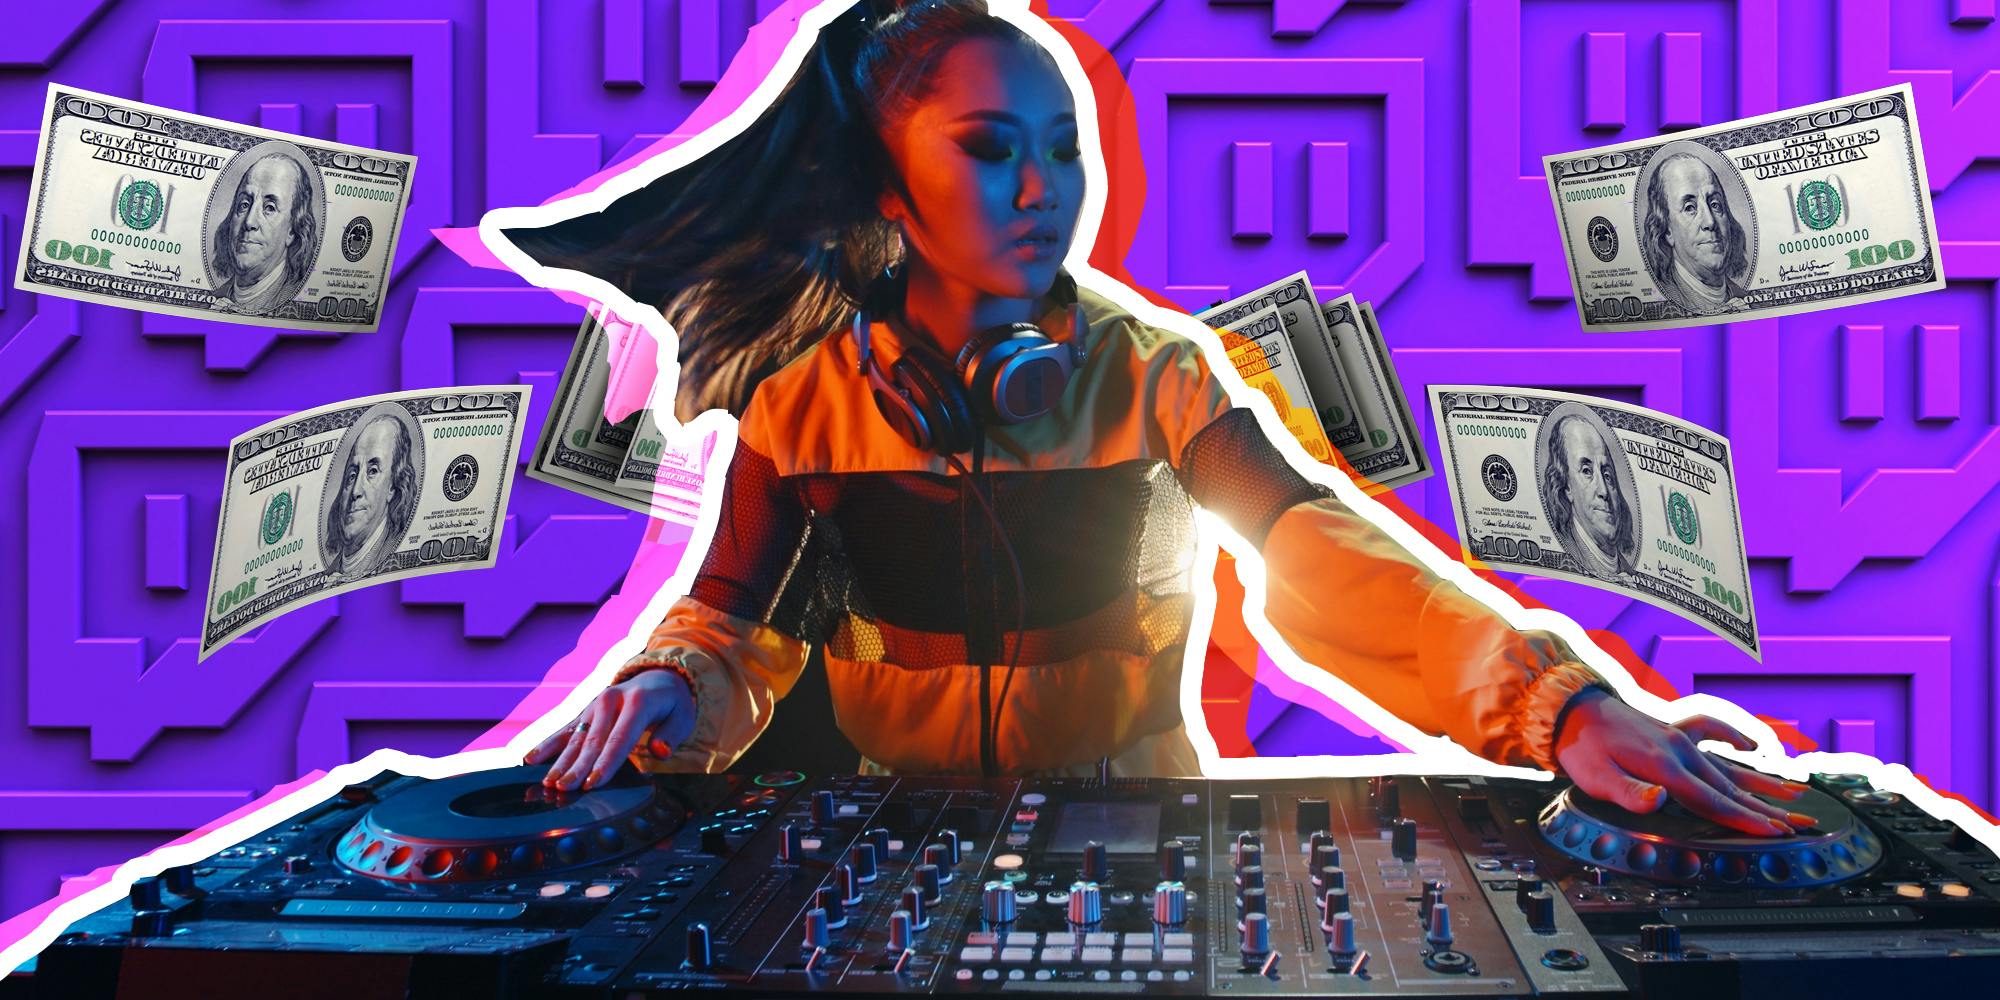 DJ spinning with money flying behind her and a background of twitch logos